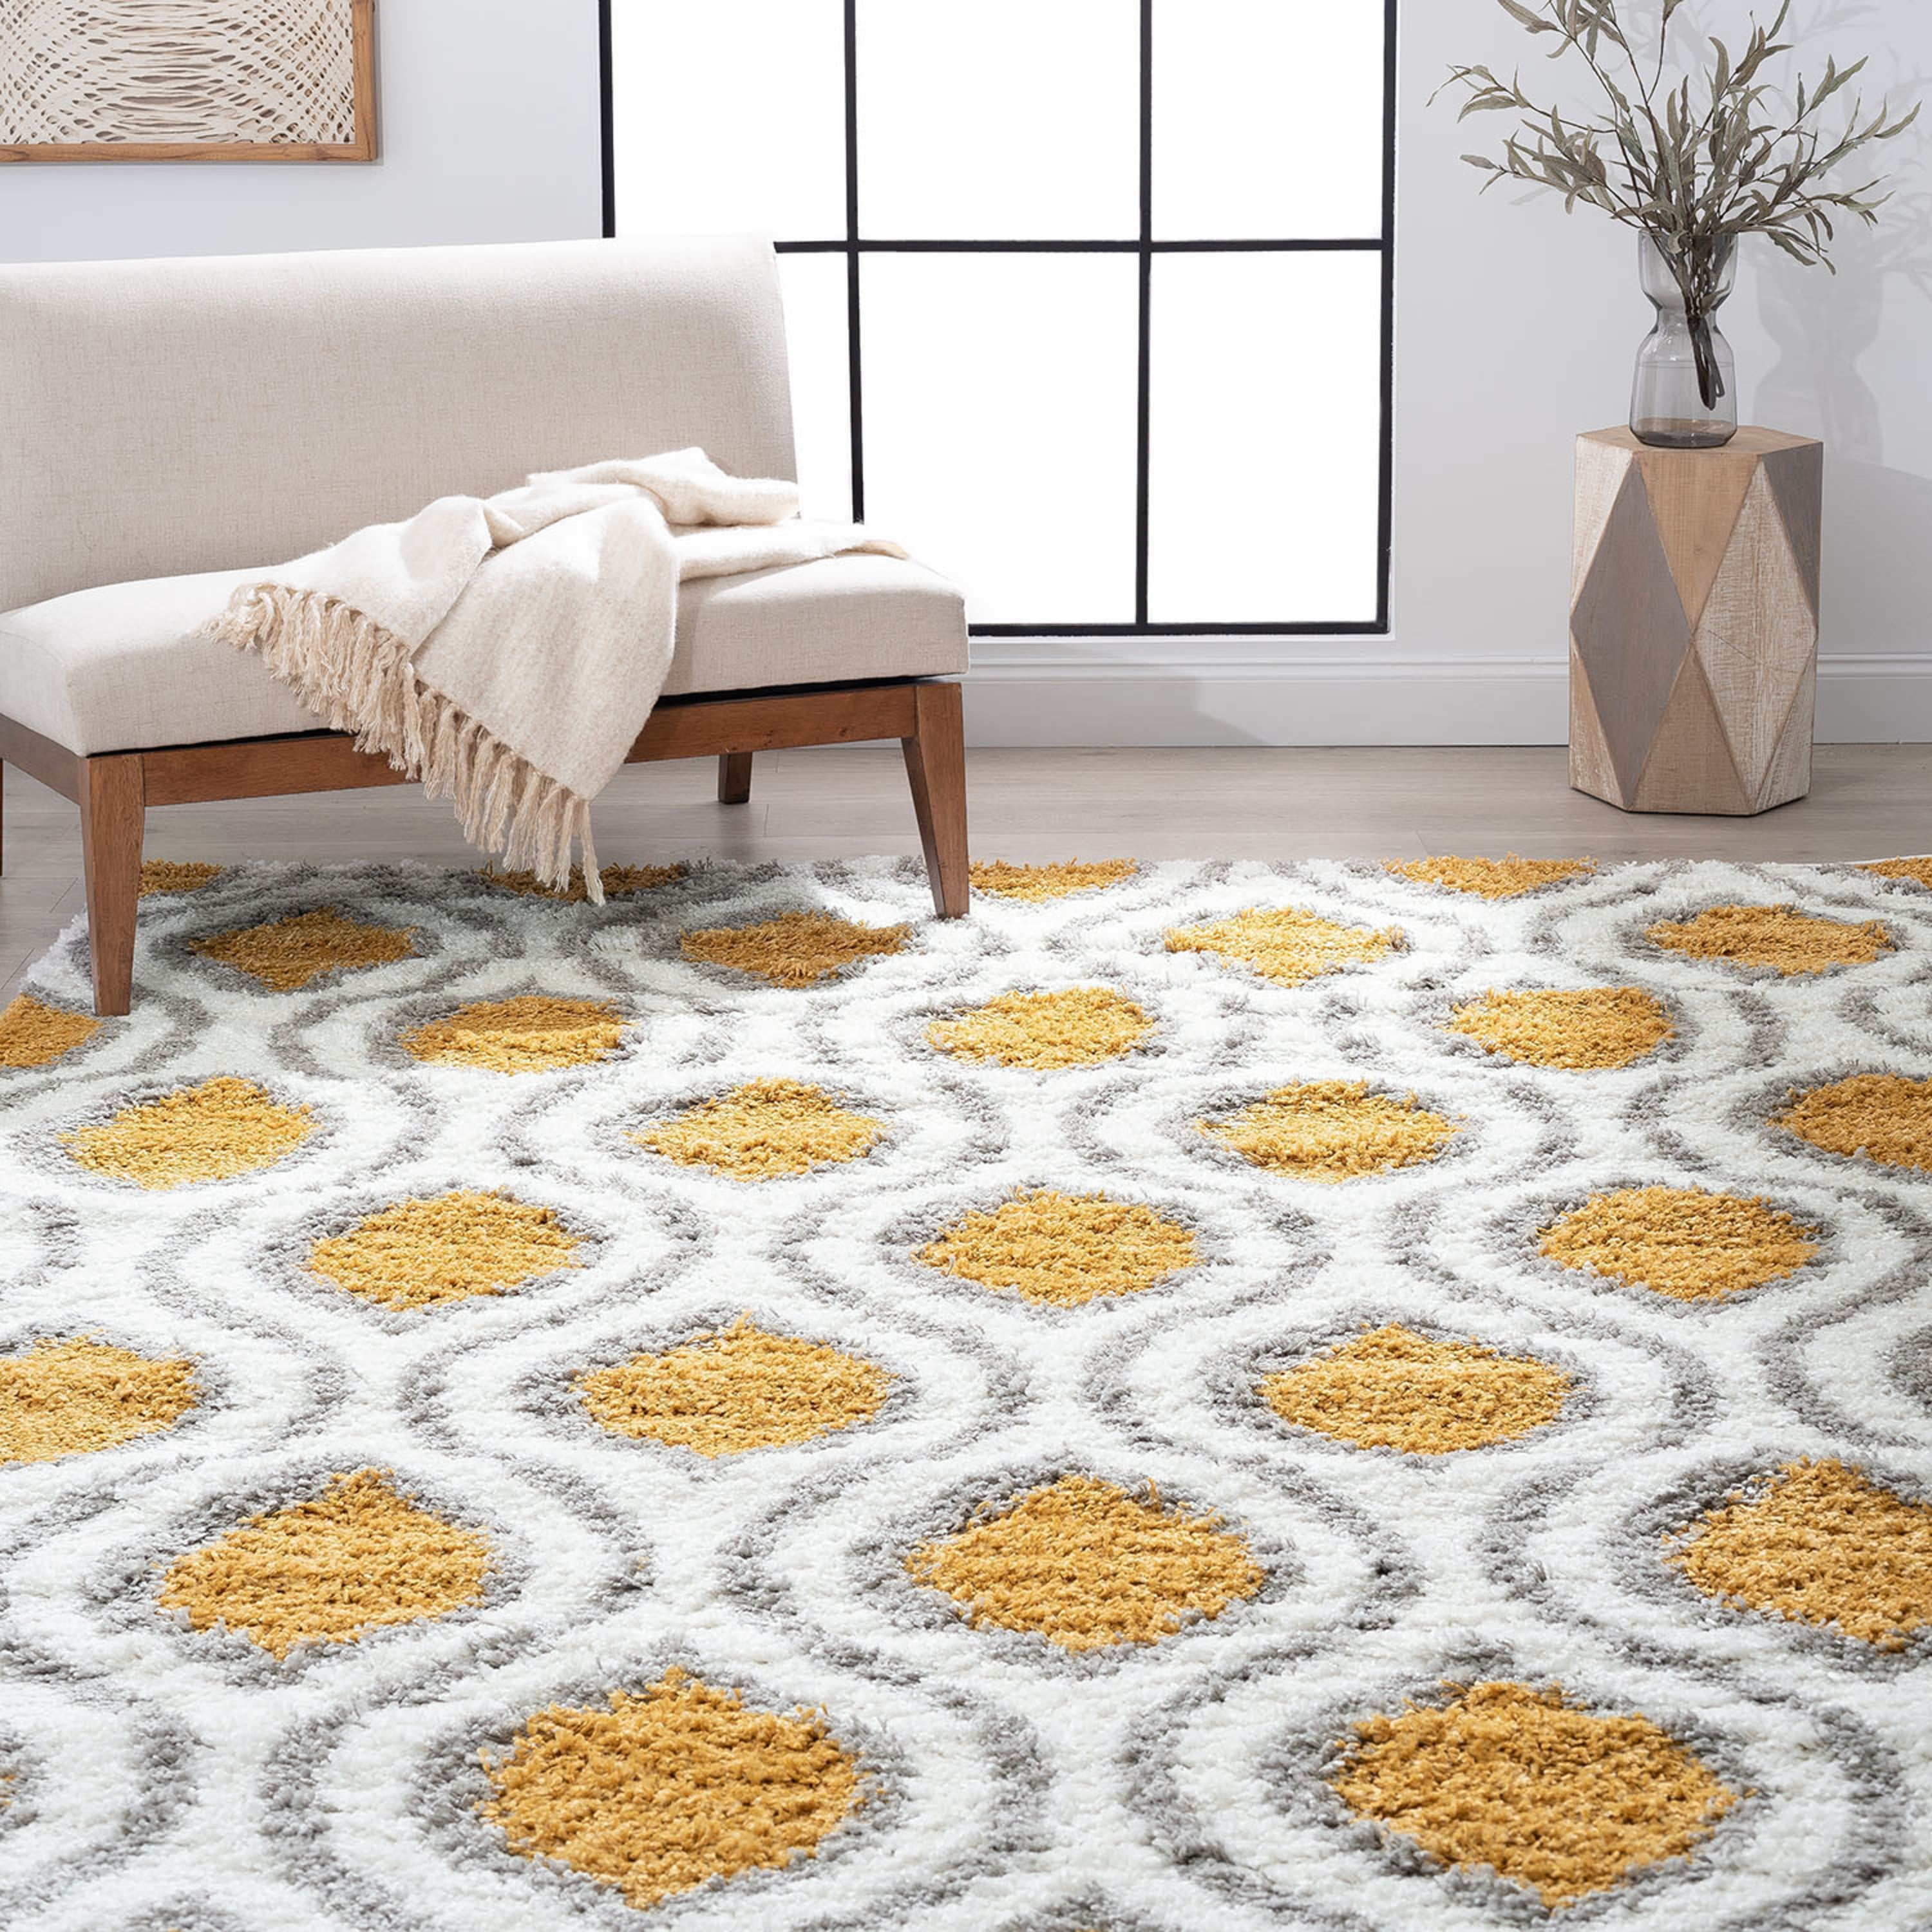 Ochre Mustard Yellow Patchwork Rug Contemporary Checked Living Room Grey Rugs 